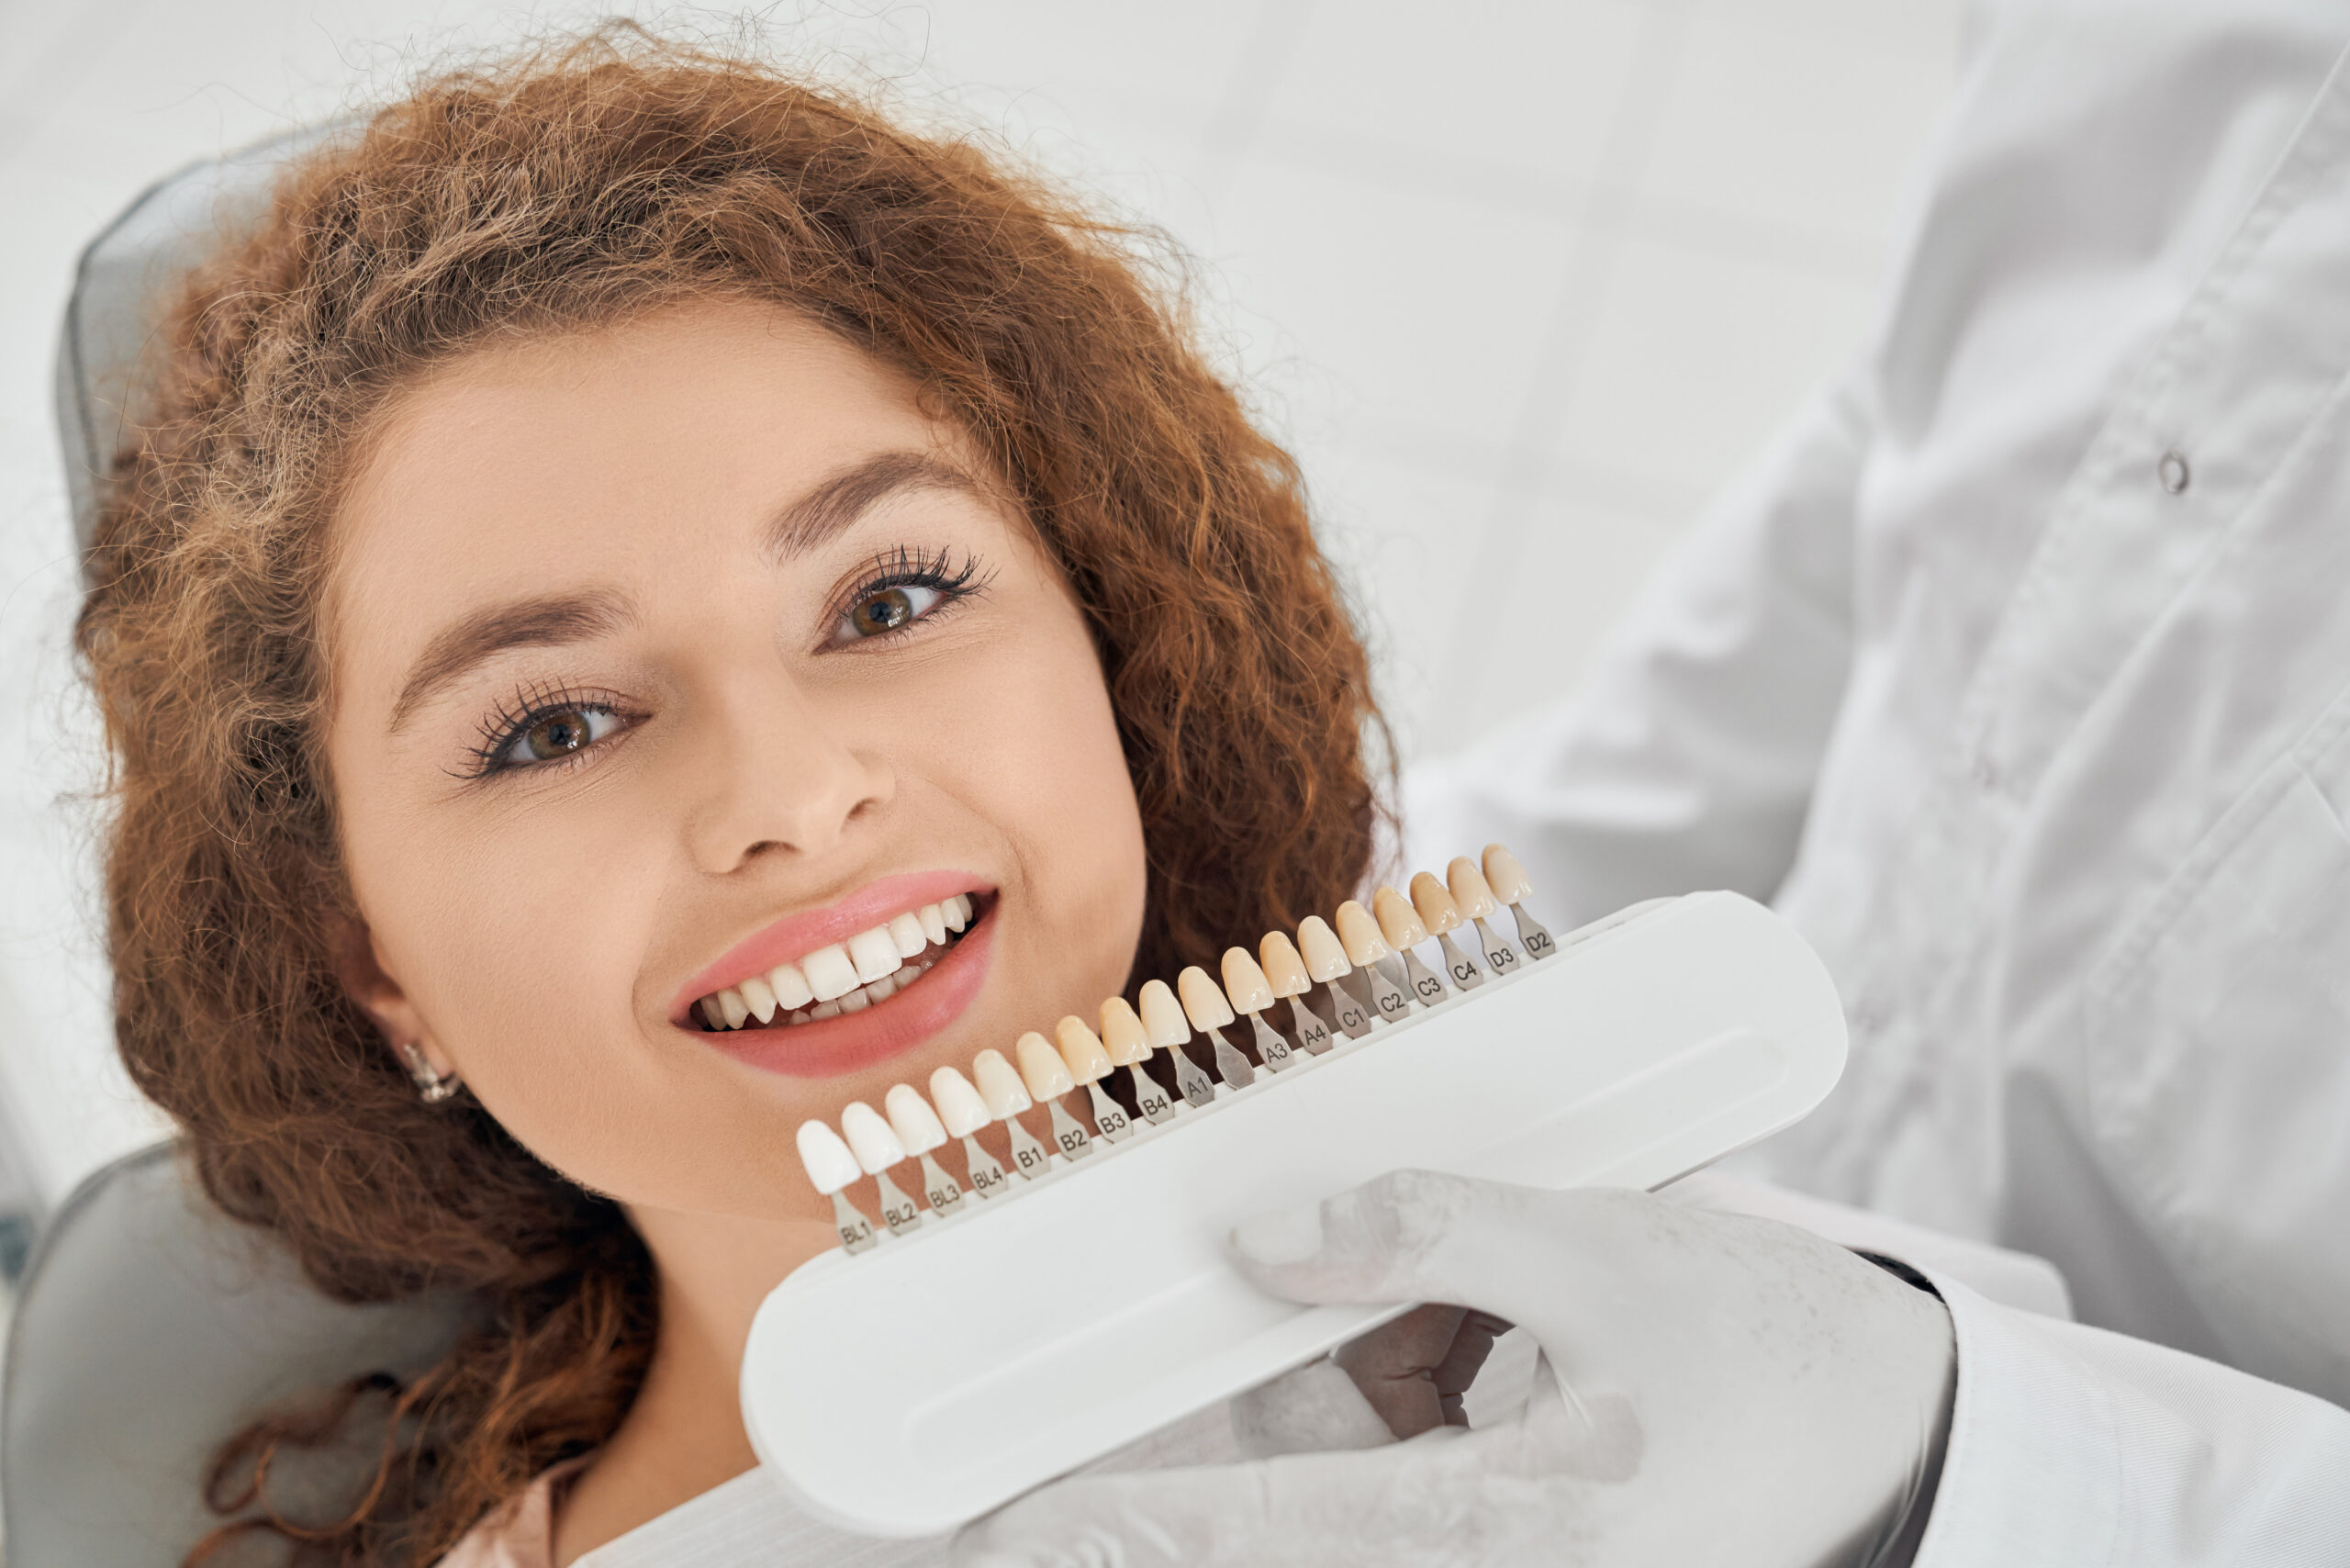 Zoom Teeth Whitening treatment for a dazzling smile in Dental care clinic